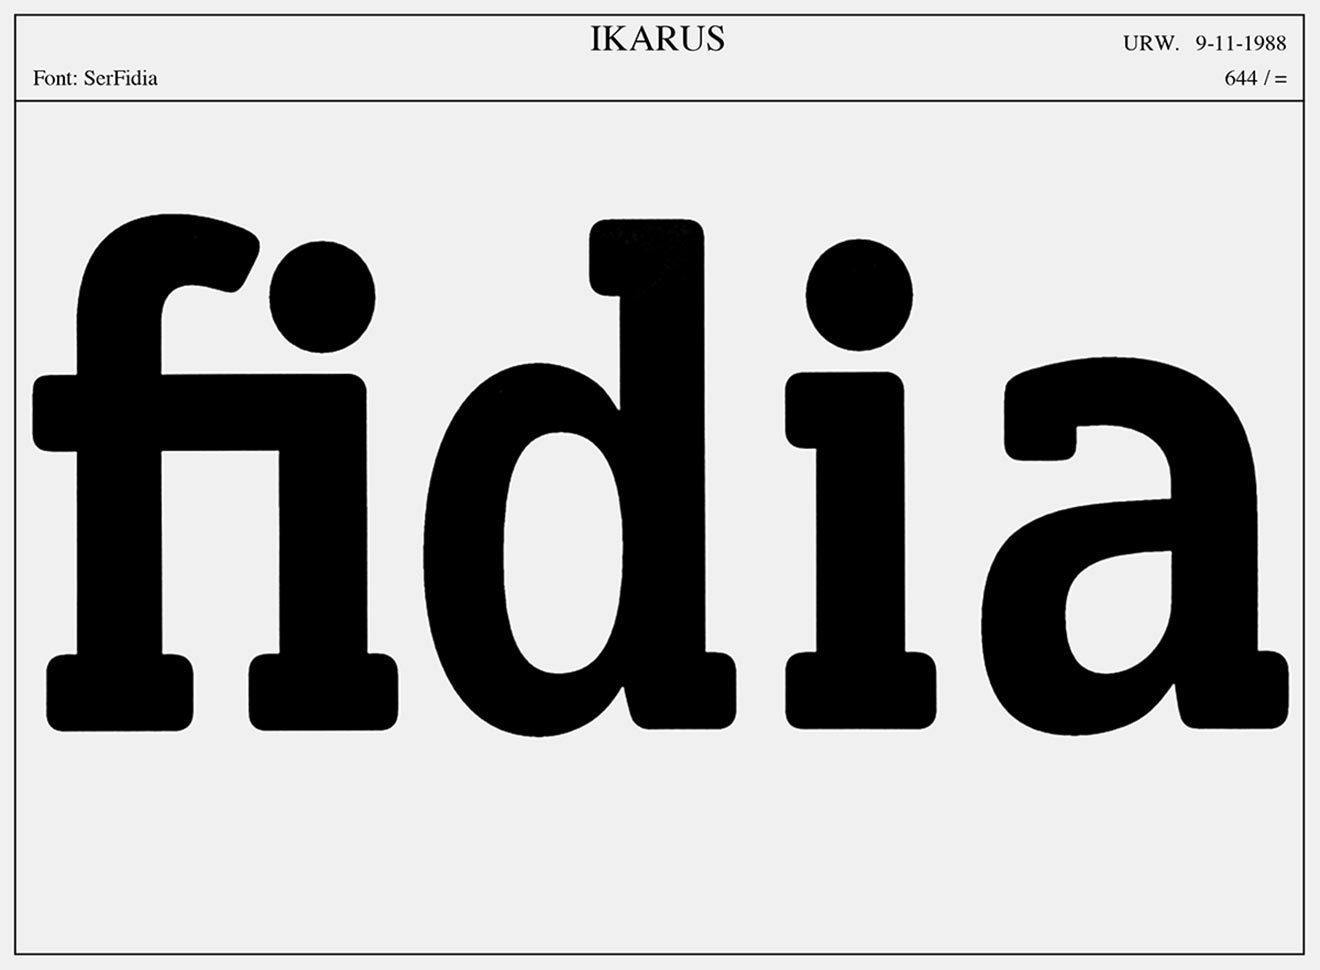 In 1988 Erik Spiekermann designed Fidia and Fidia Serif for an Italian pharmaceutics company of the same name. To be precise, Fidia Serif was a slab serif. Both were equipped with round corners to appear warm and appealing on small packaging. (With kind permission from the archive of Erik Spiekermann.)